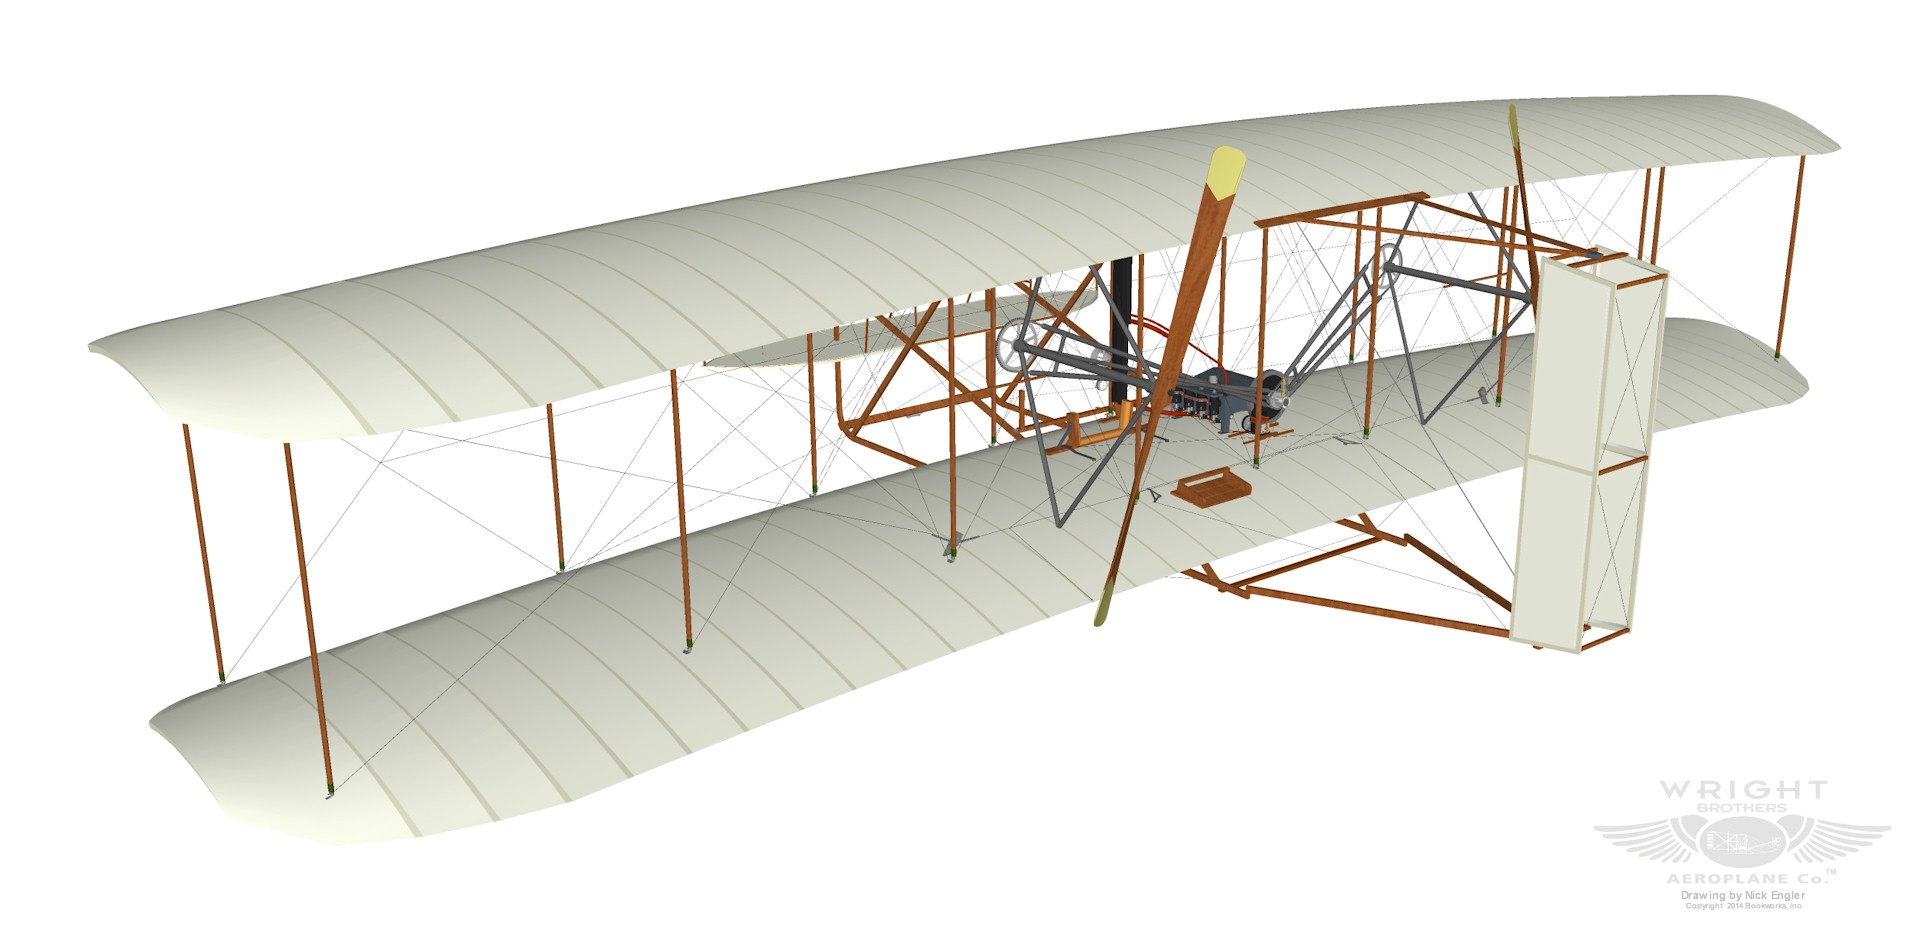 wright flyer clipart - photo #25